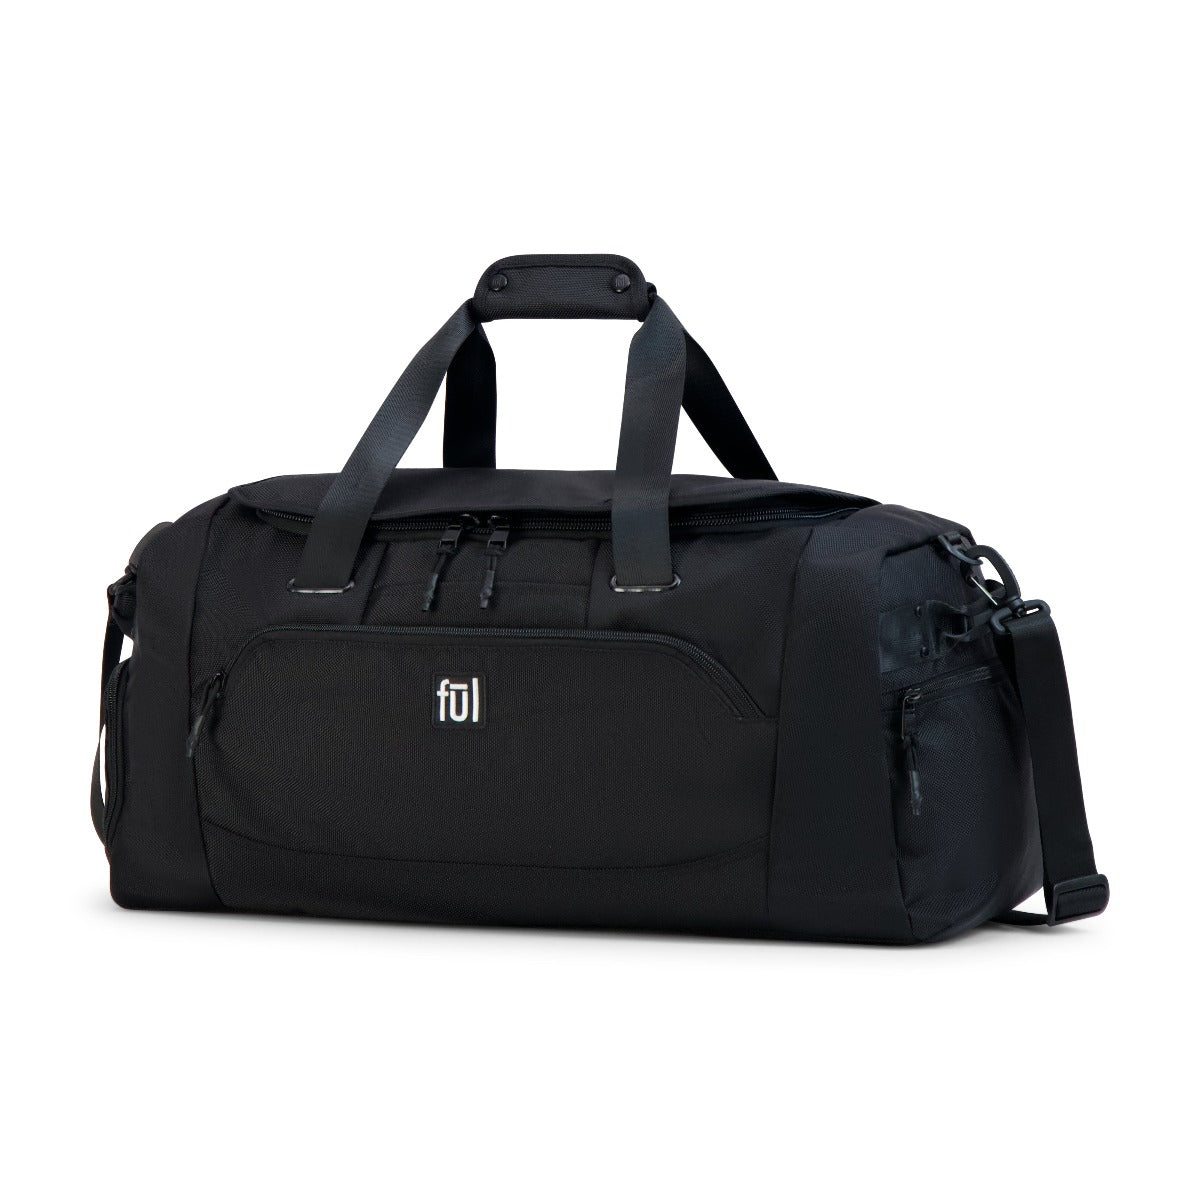 ful tactics collection siege duffle bag black - best duffel bags for travel